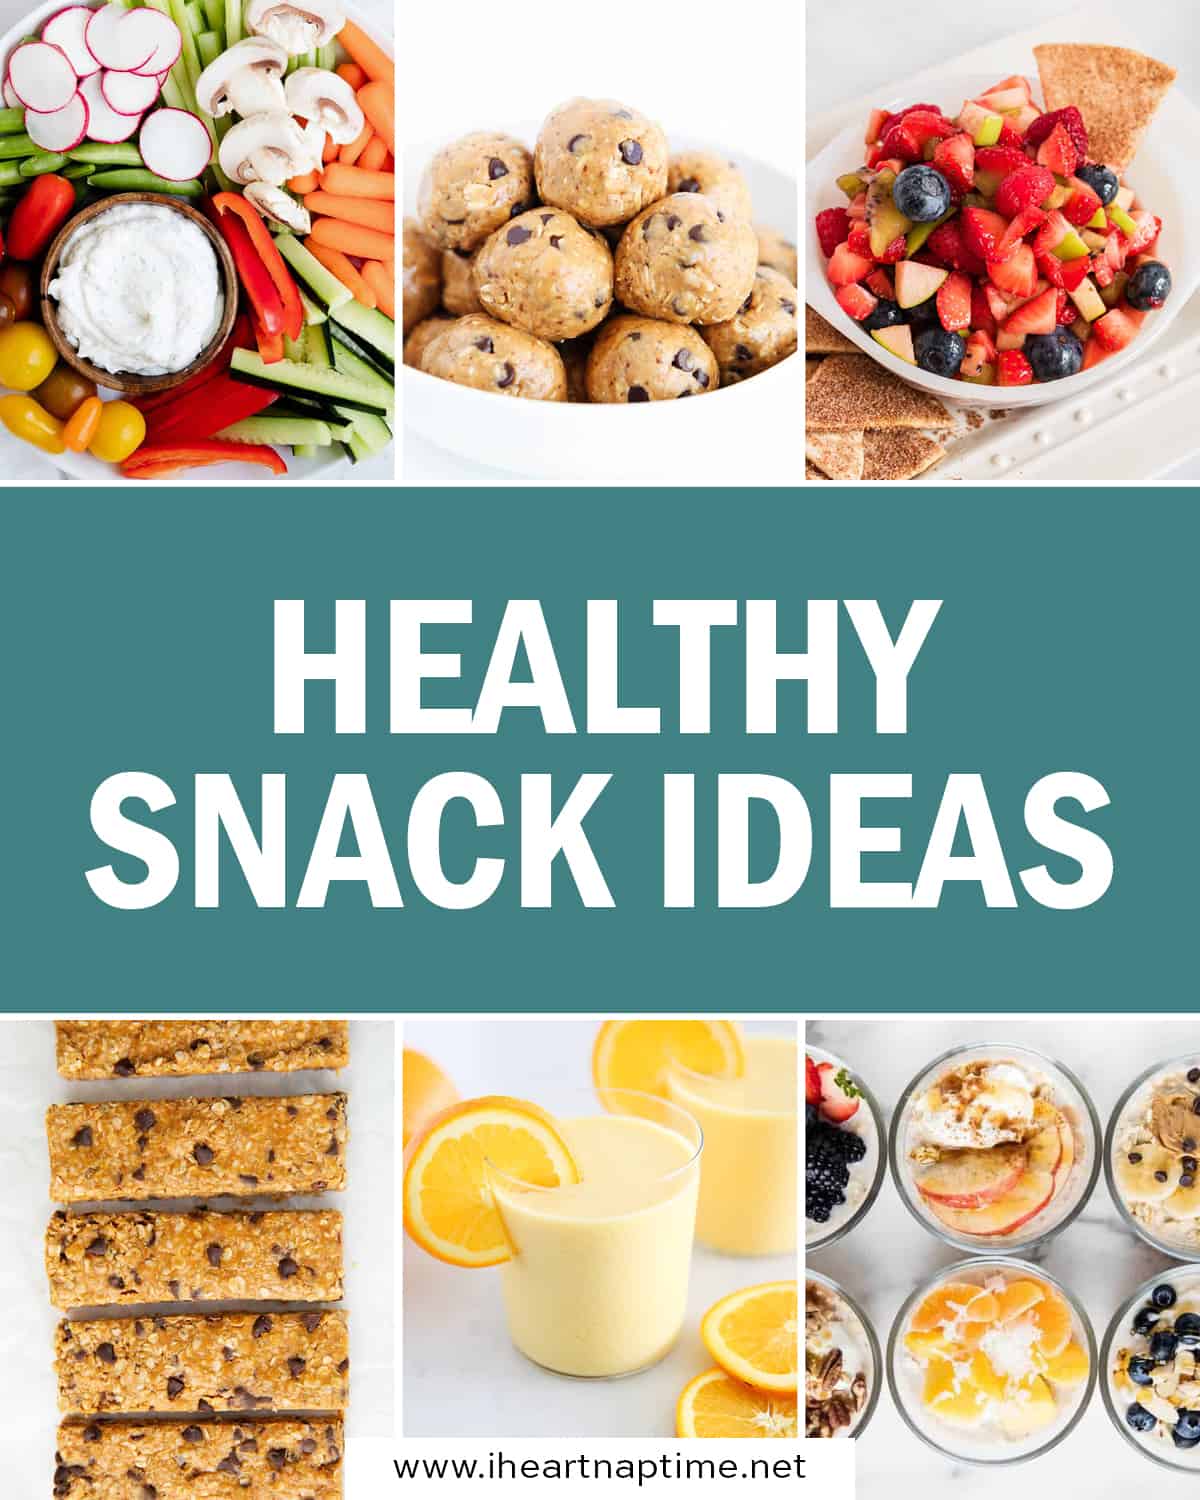 A collage of healthy snack ideas photos.